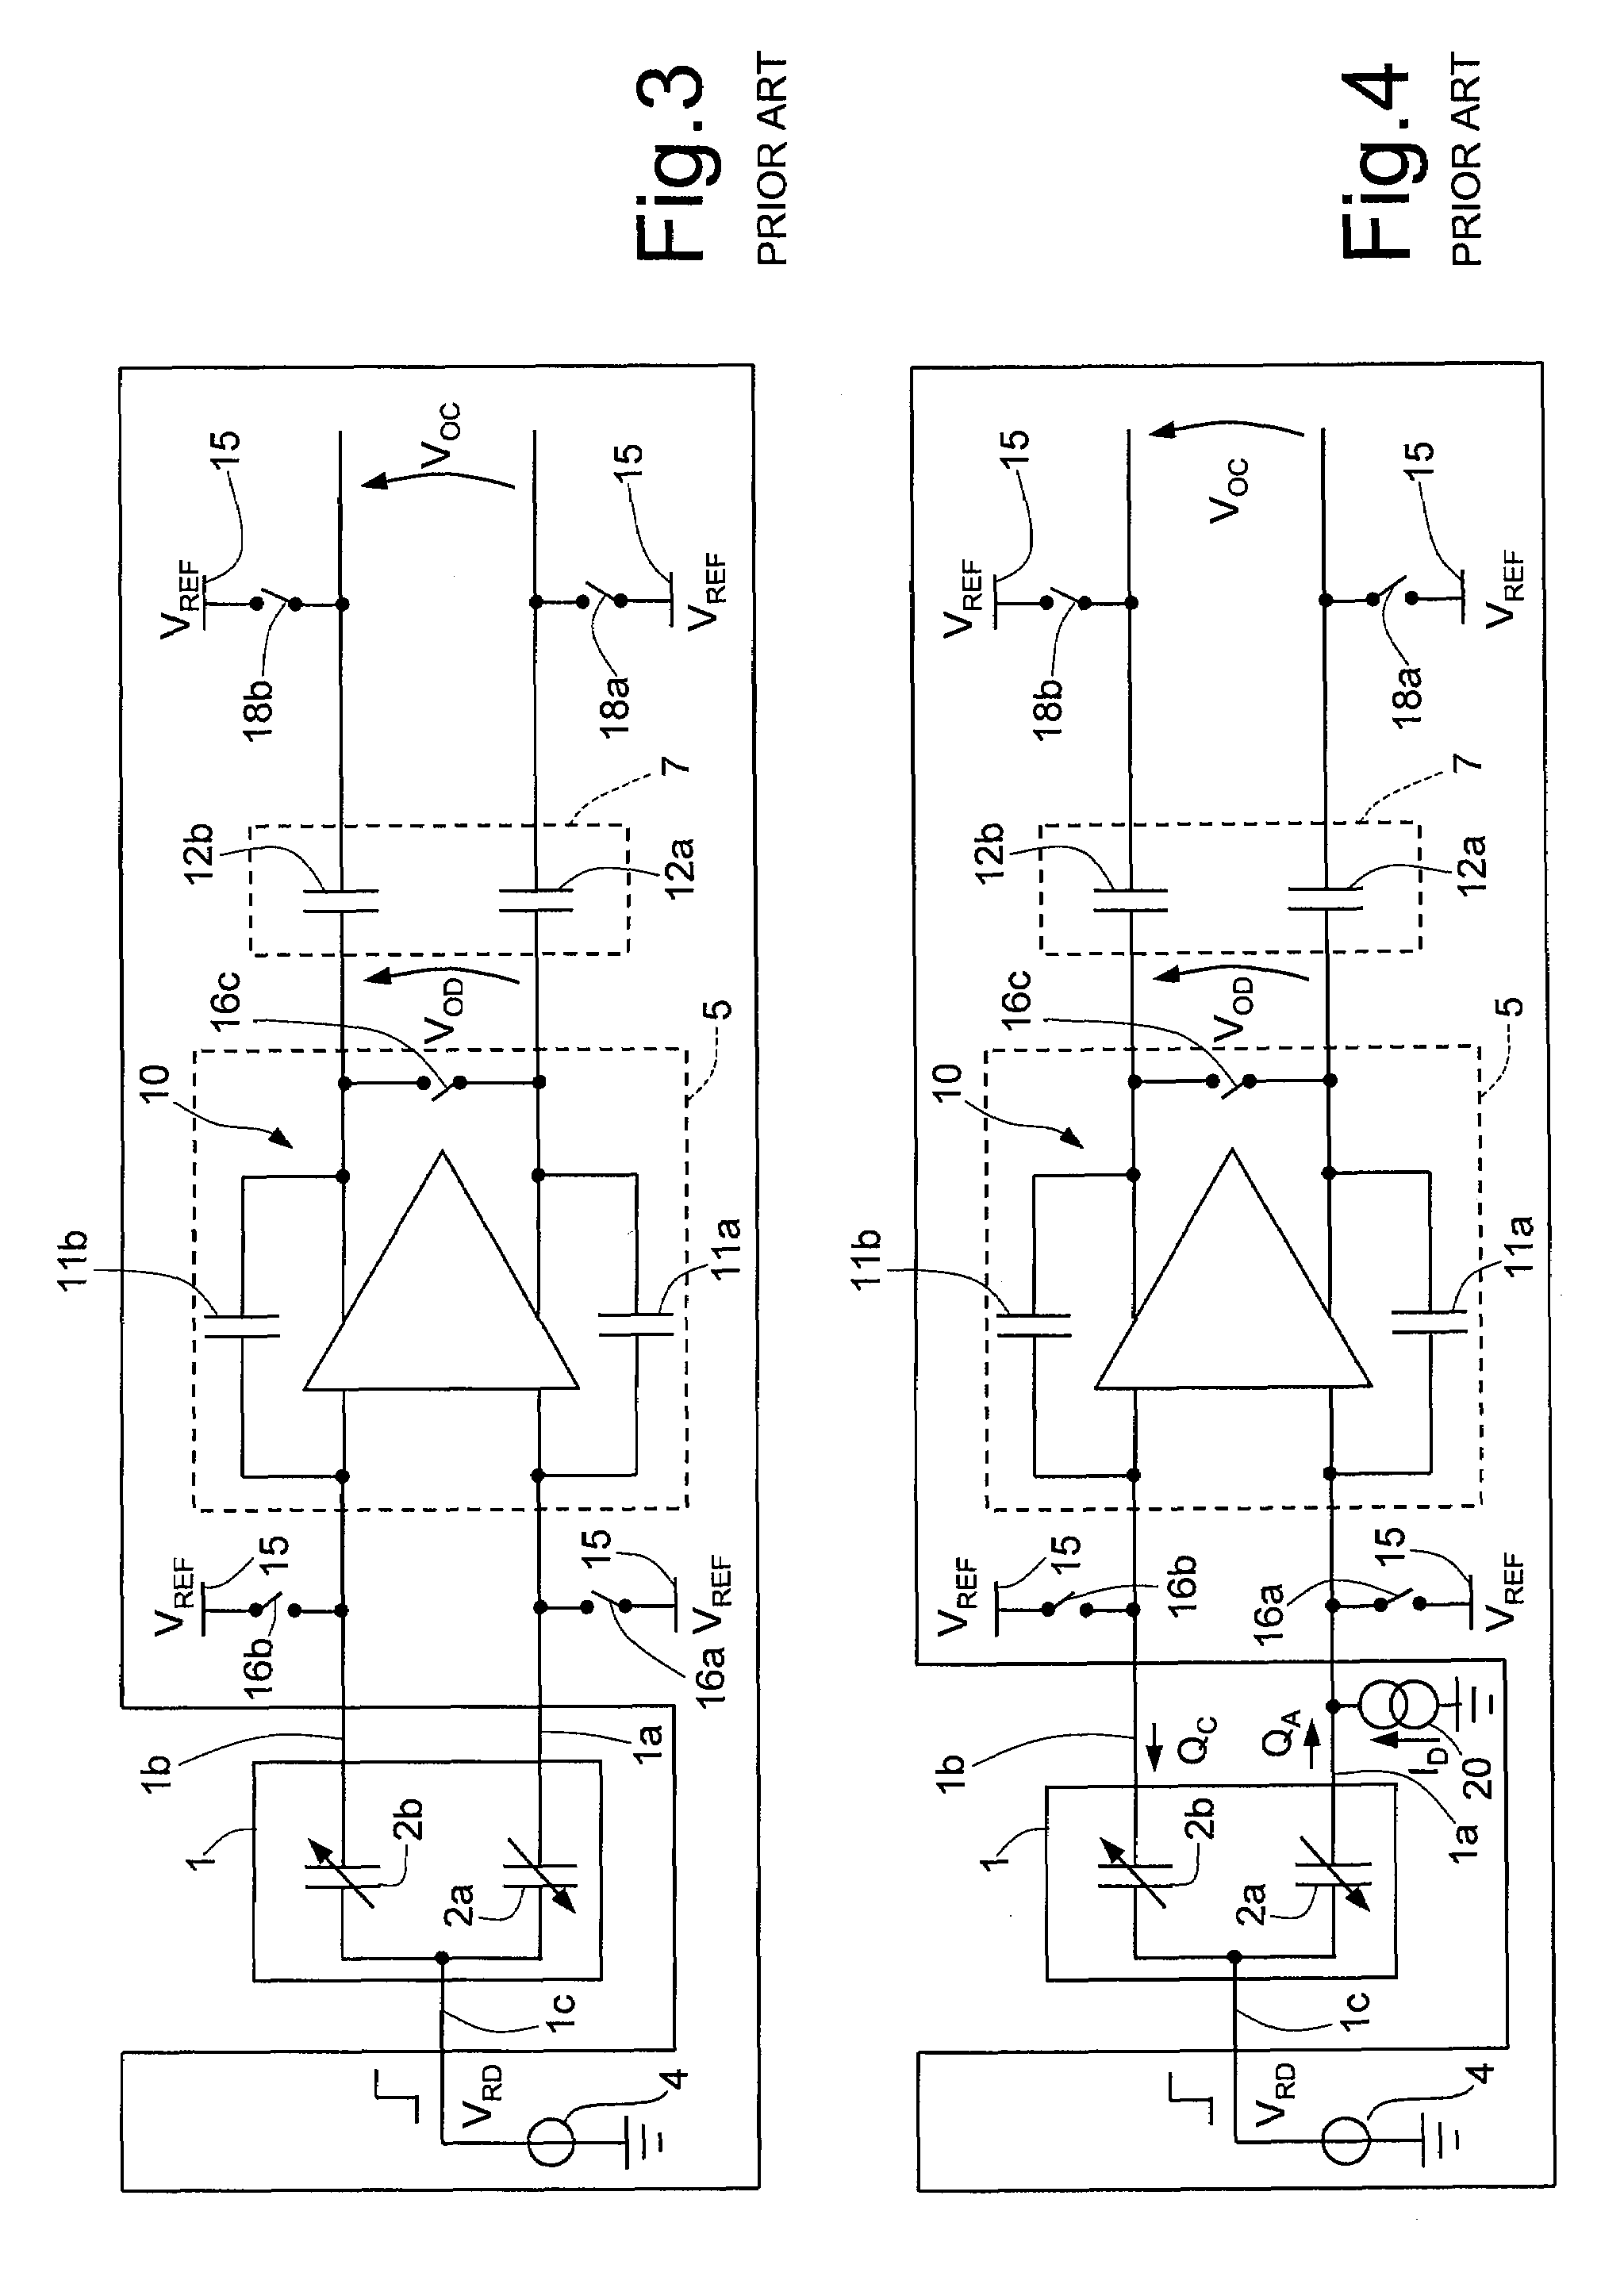 Device and method for reading a capacitive sensor, in particular of a micro-electromechanical type